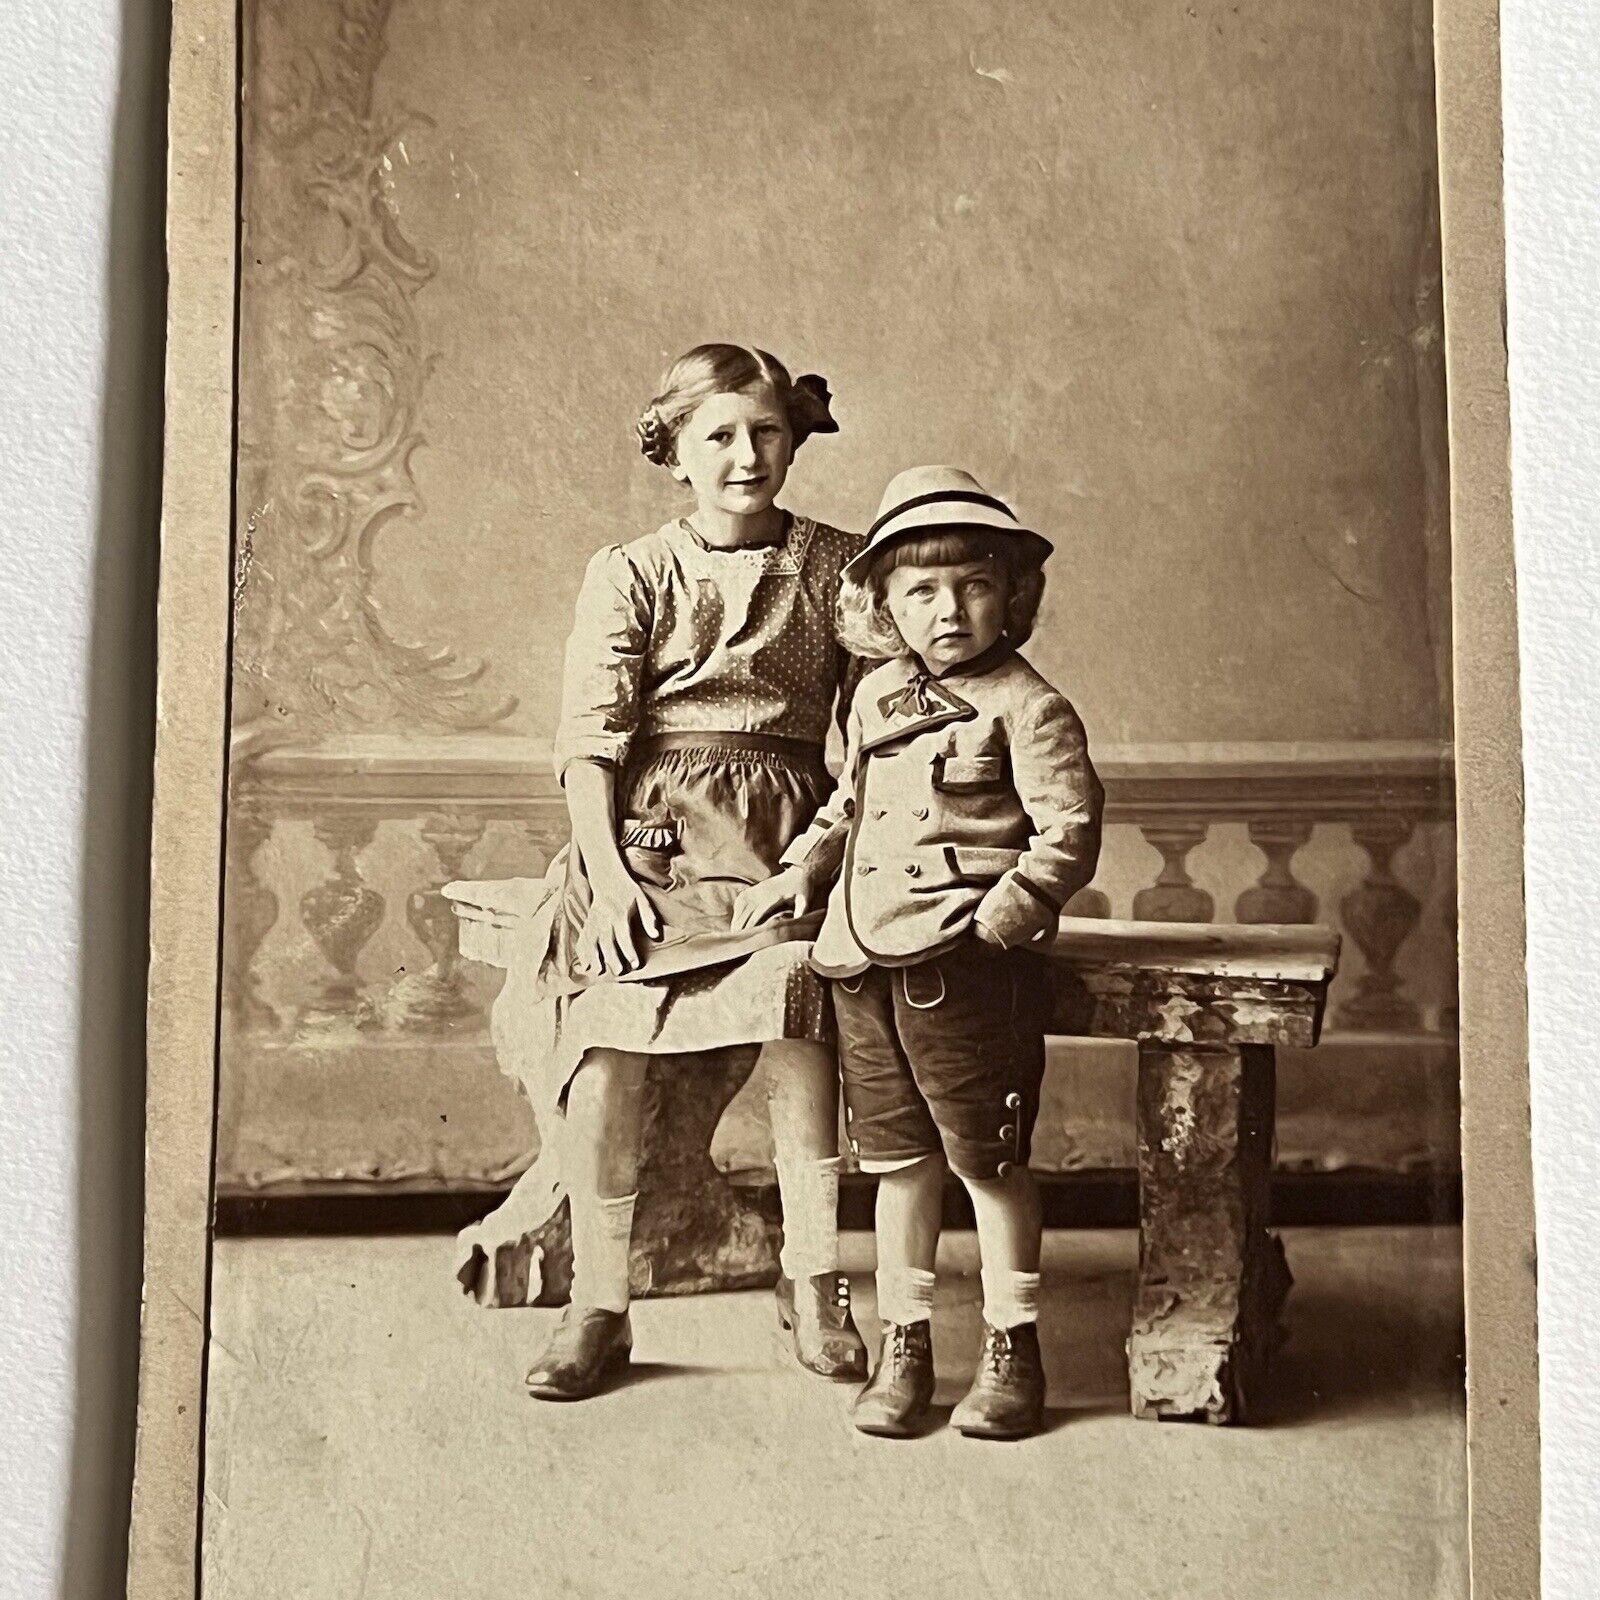 Antique Cabinet Card Photograph Adorable Children Germany Sweet Attire Siblings